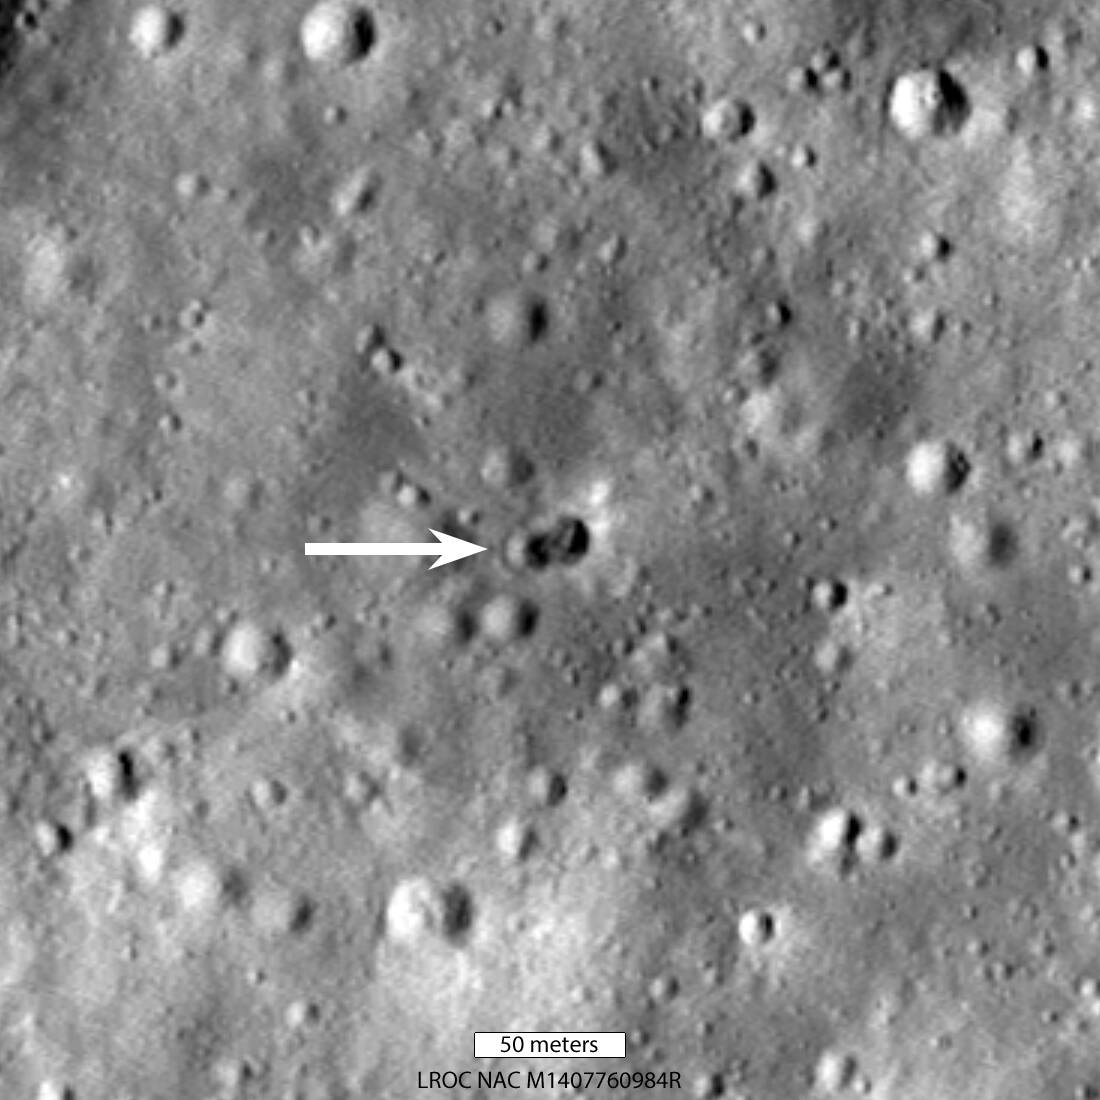 photo of Whatever hit the Moon in March, it left this weird double crater image